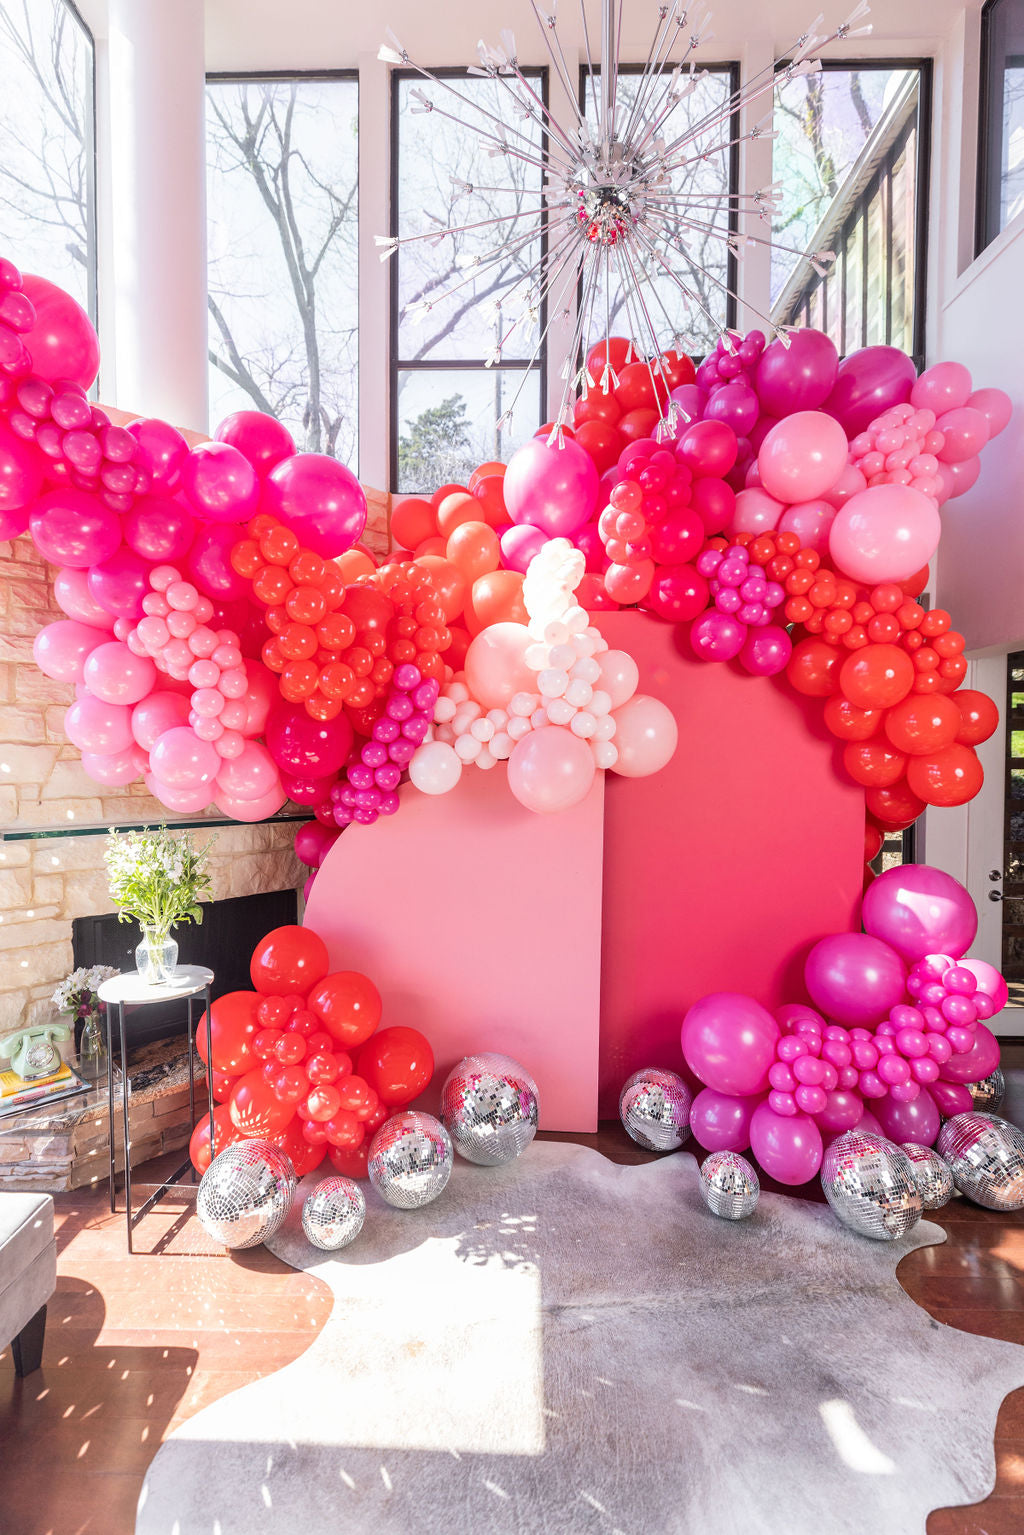 A majestic balloon arch spanning an event space, adding a touch of grandeur and festivity to the occasion.